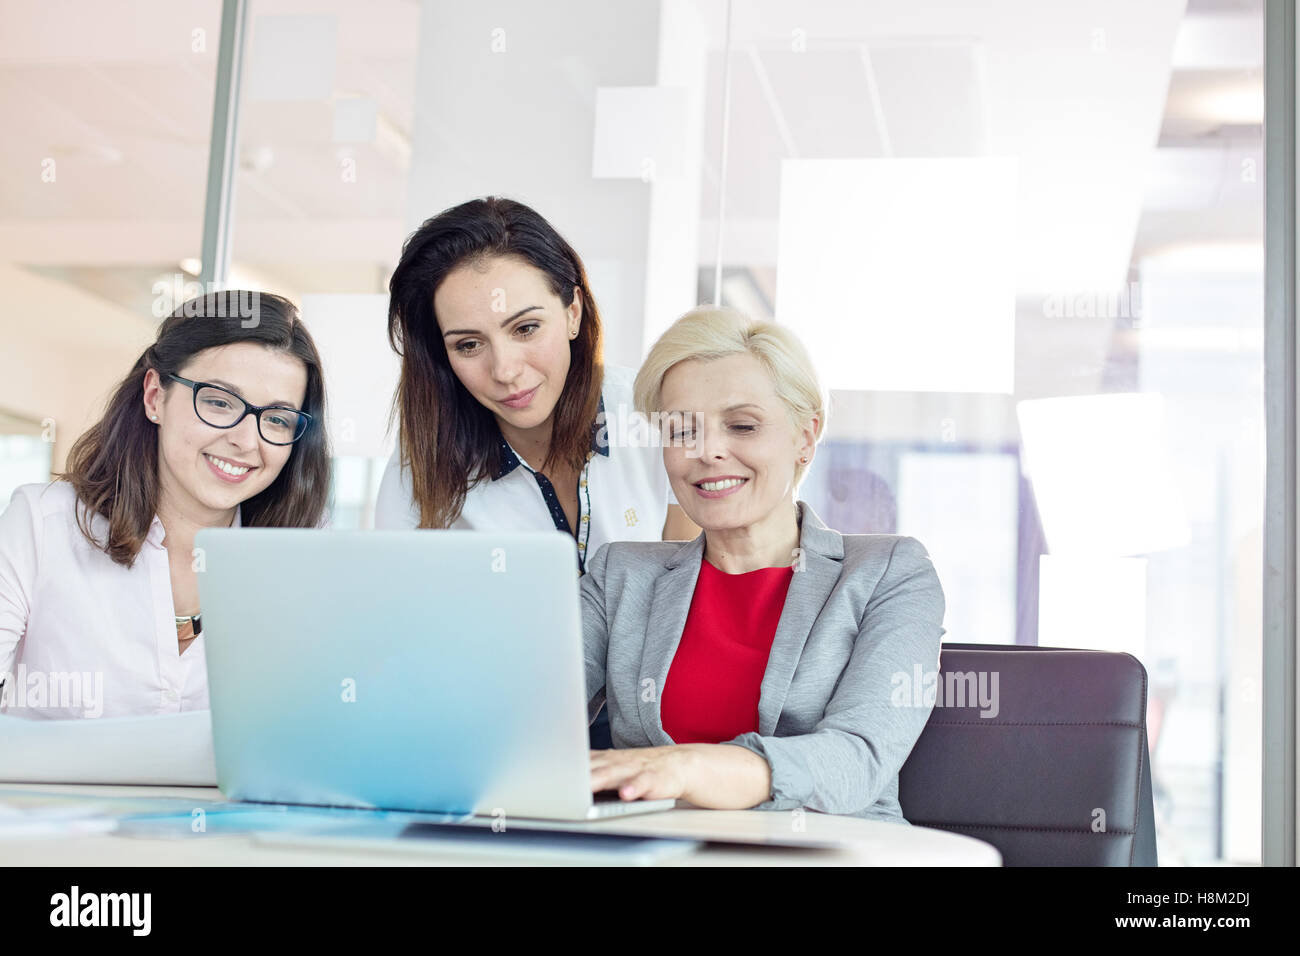 Businesswomen using laptop at table in office Banque D'Images